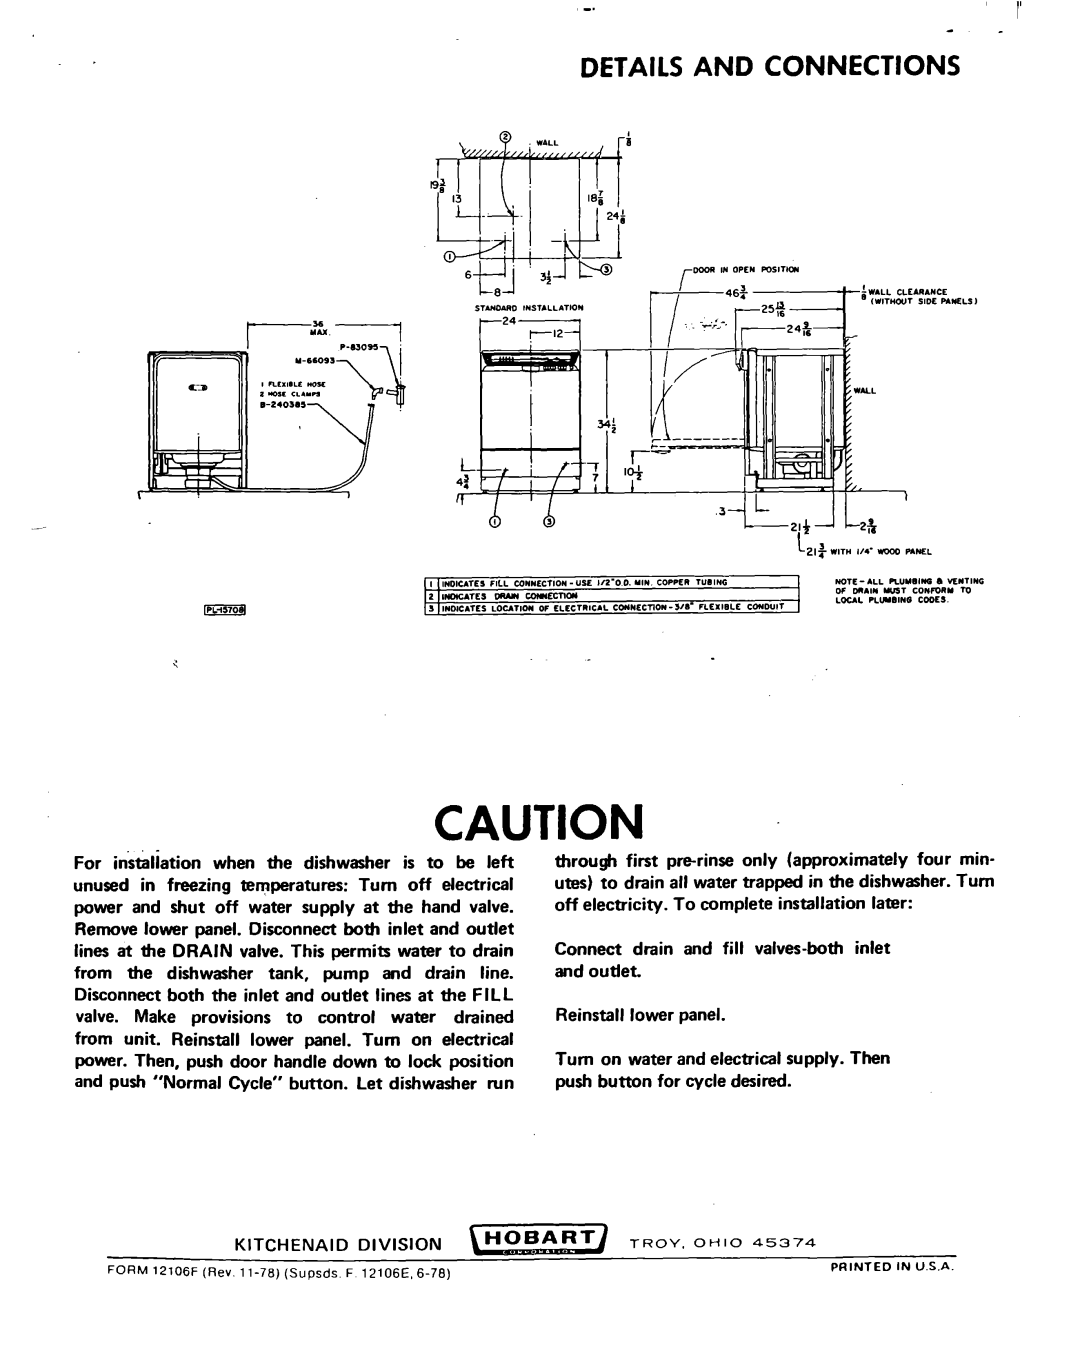 KitchenAid KD-18 installation instructions Details And Connections 